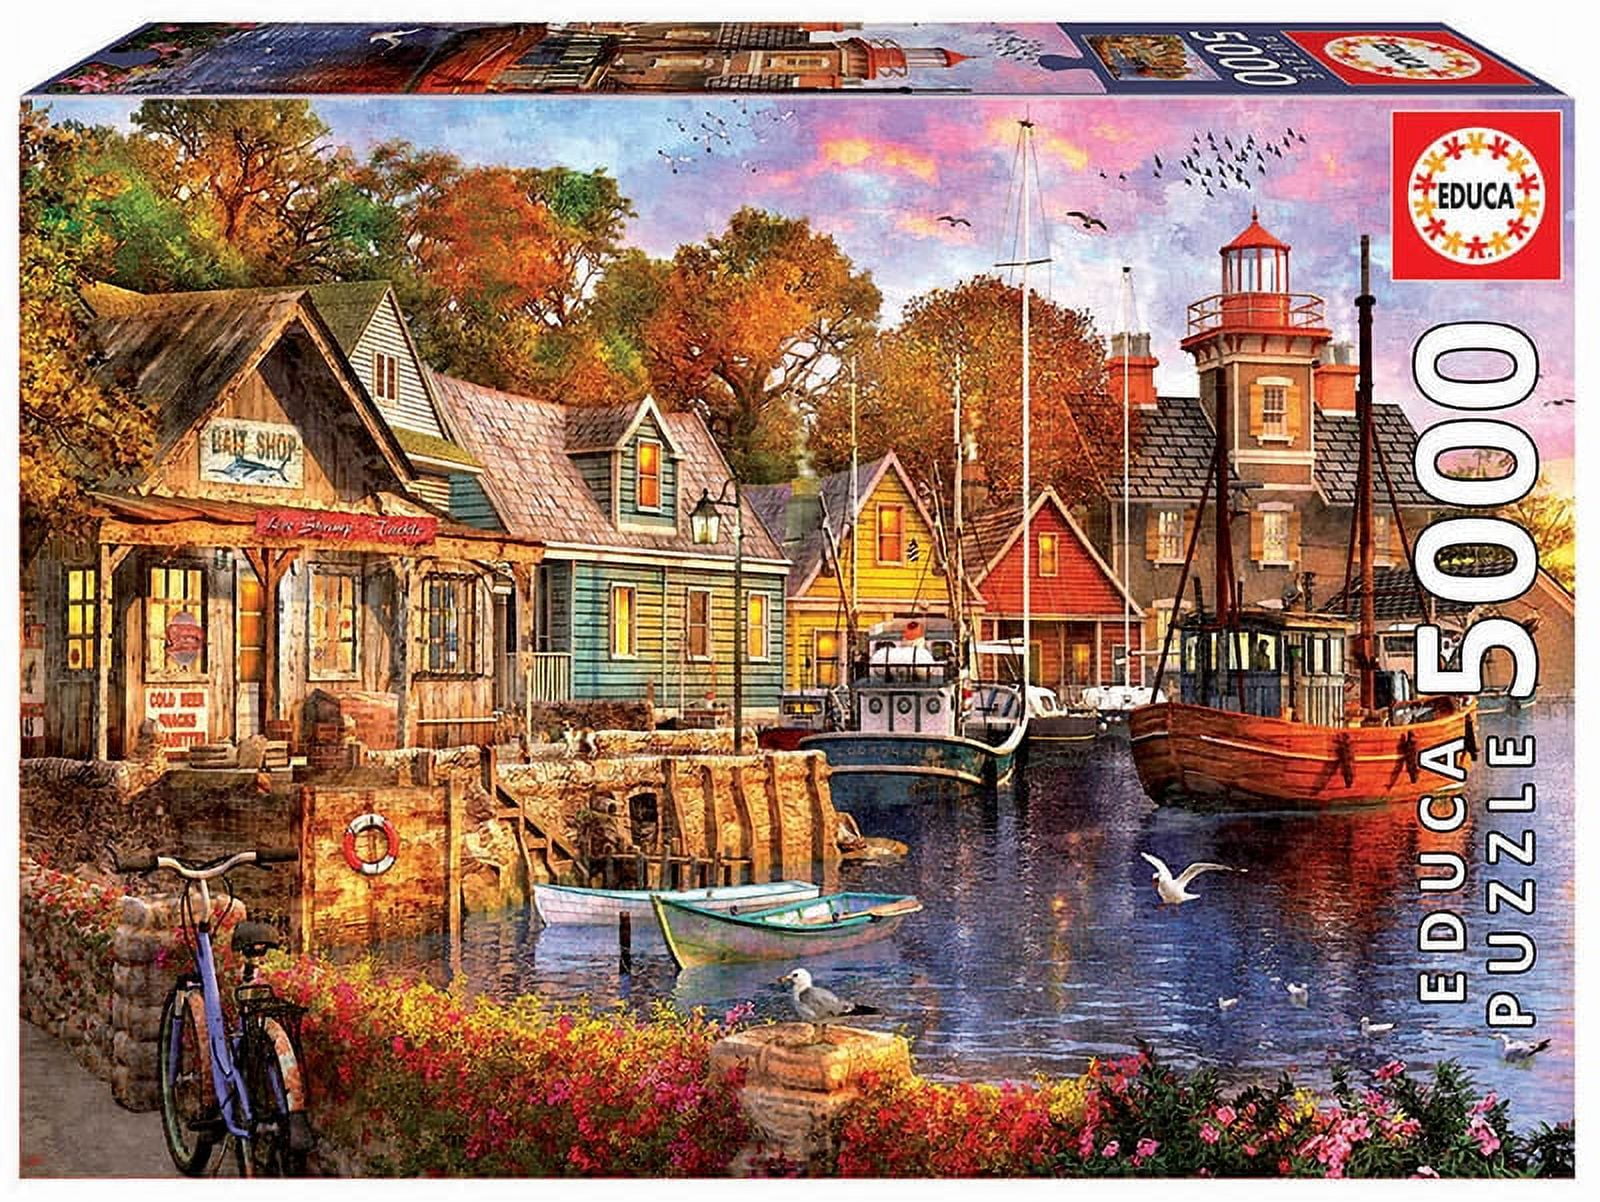 The Harbour Evening, a 5000-piece Puzzle by Educa